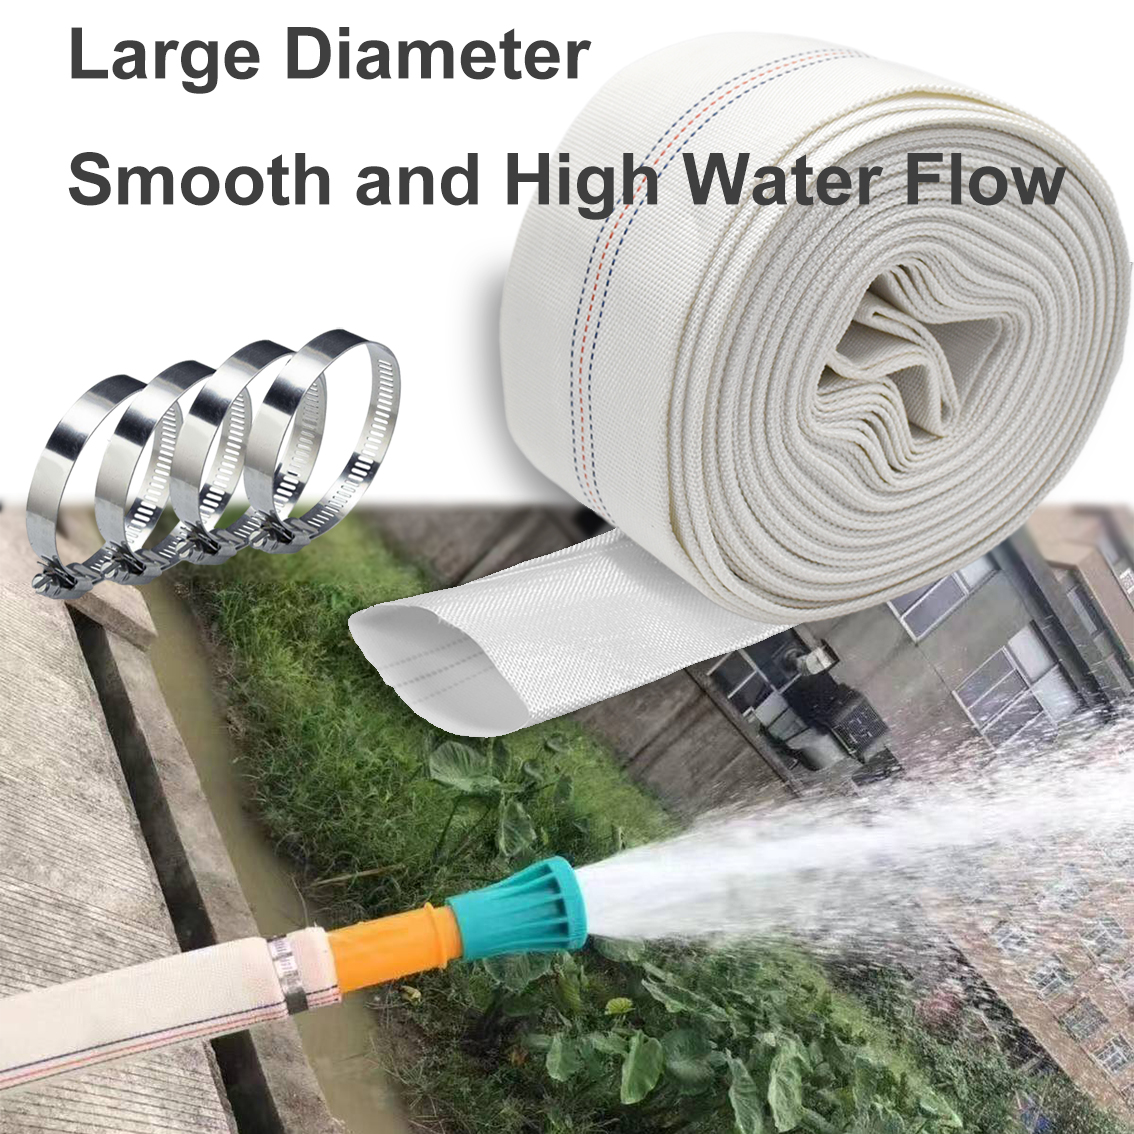 iMeshbean White Pool Backwash Hose 3" ID x 98ft Sump Pump Discharge Hose Pool Drain Hose with Adjustable Hose Clamp for Patio Garden Lawn Irrigation Swimming Pool Submersible Pump Water Transfer - image 4 of 7